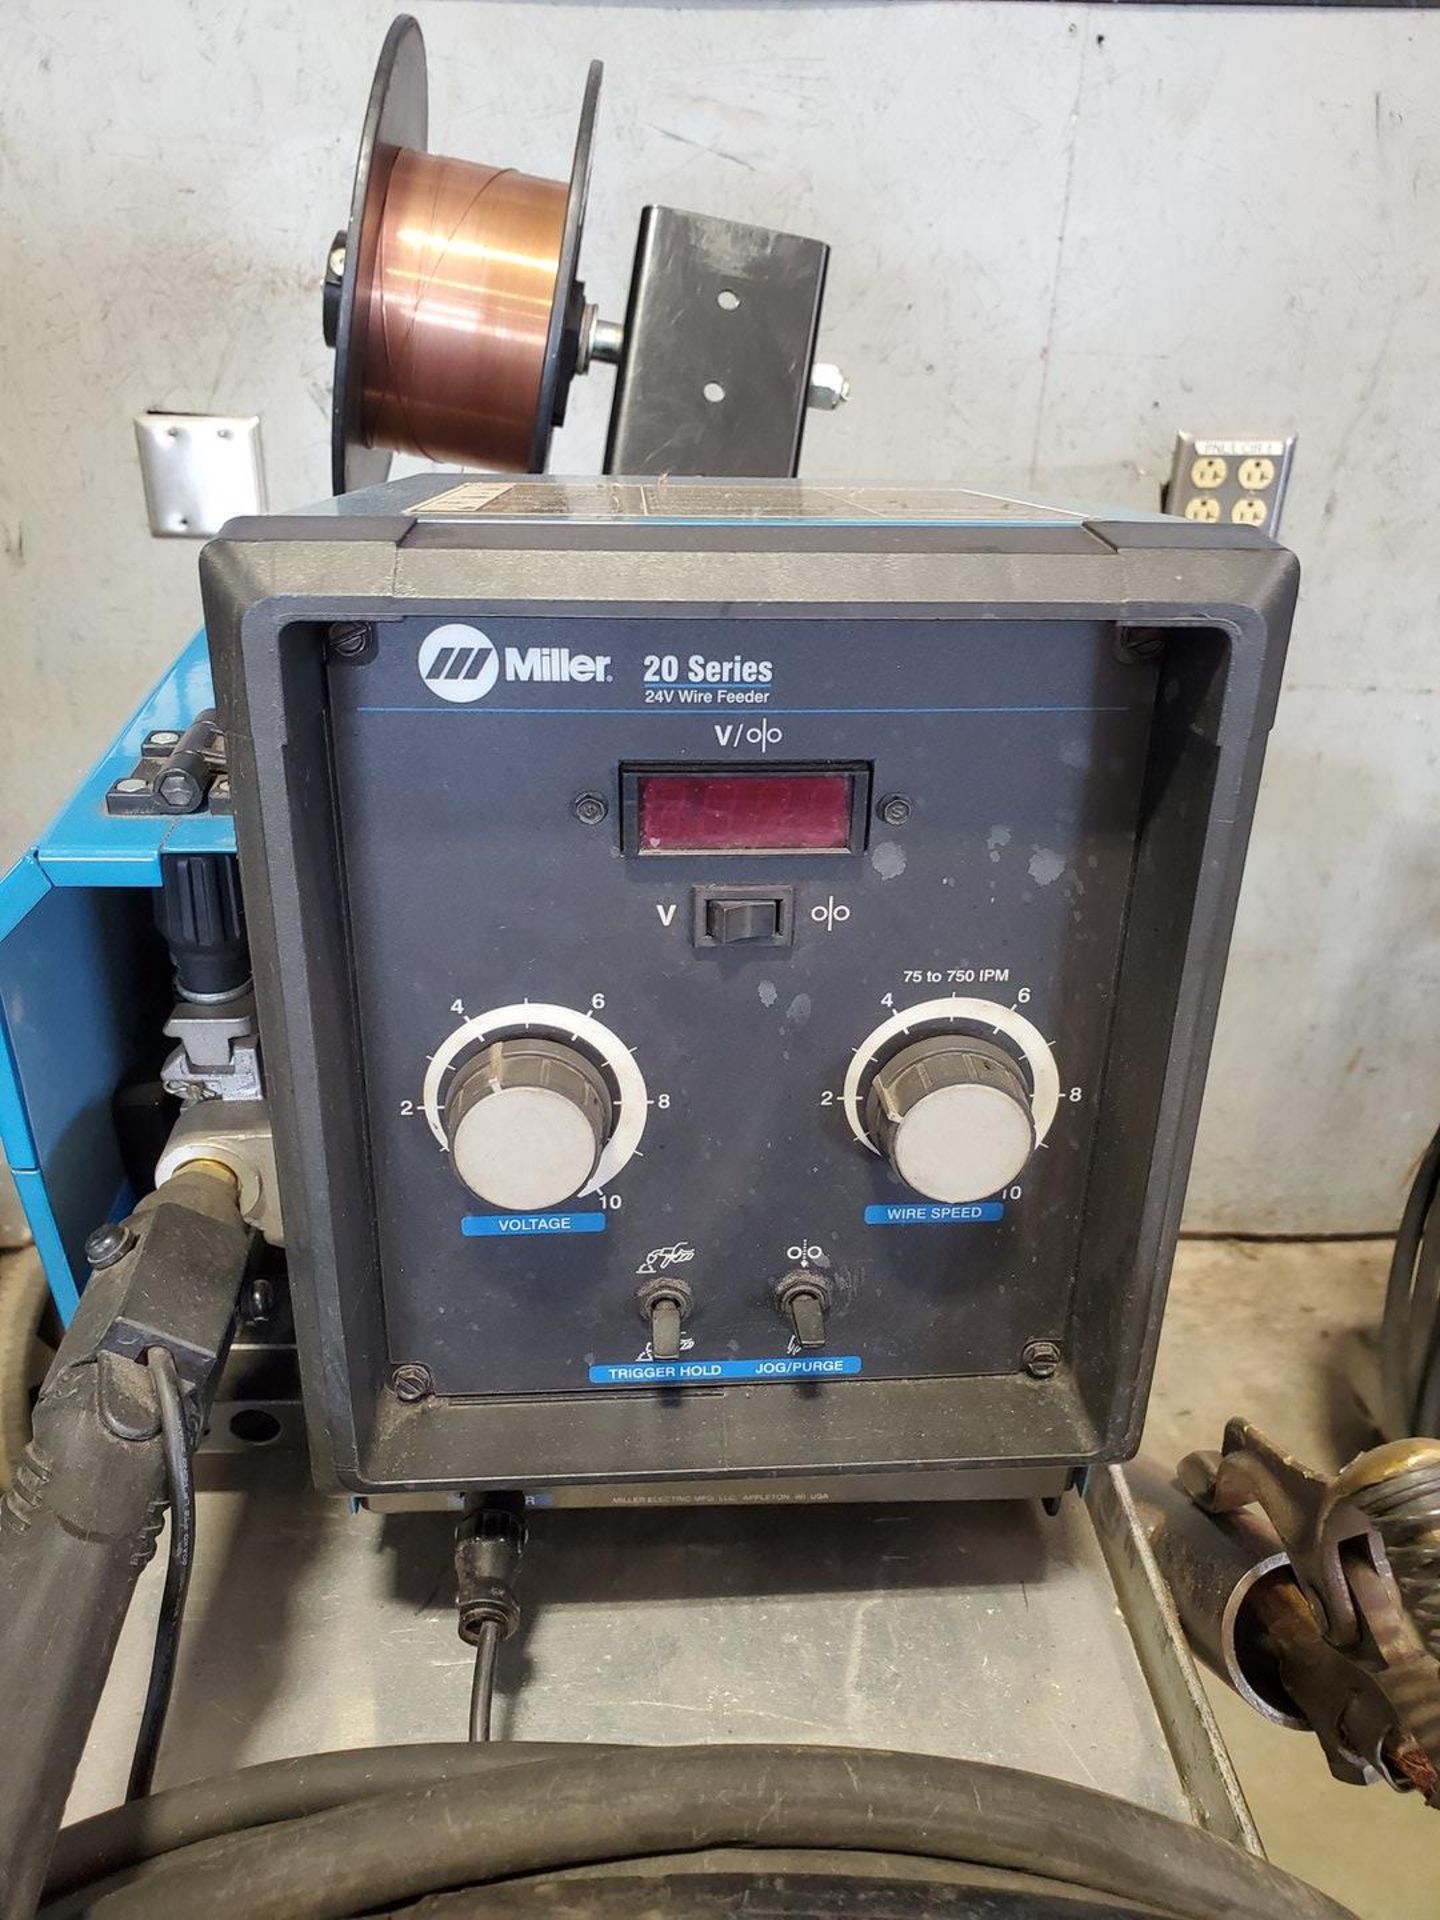 Miller XMT 350 CC/CV Multiprocessing Welder 208-575V, 350A, 1/3PH, 50/60HZ; W/ 20 Series Wire - Image 6 of 8